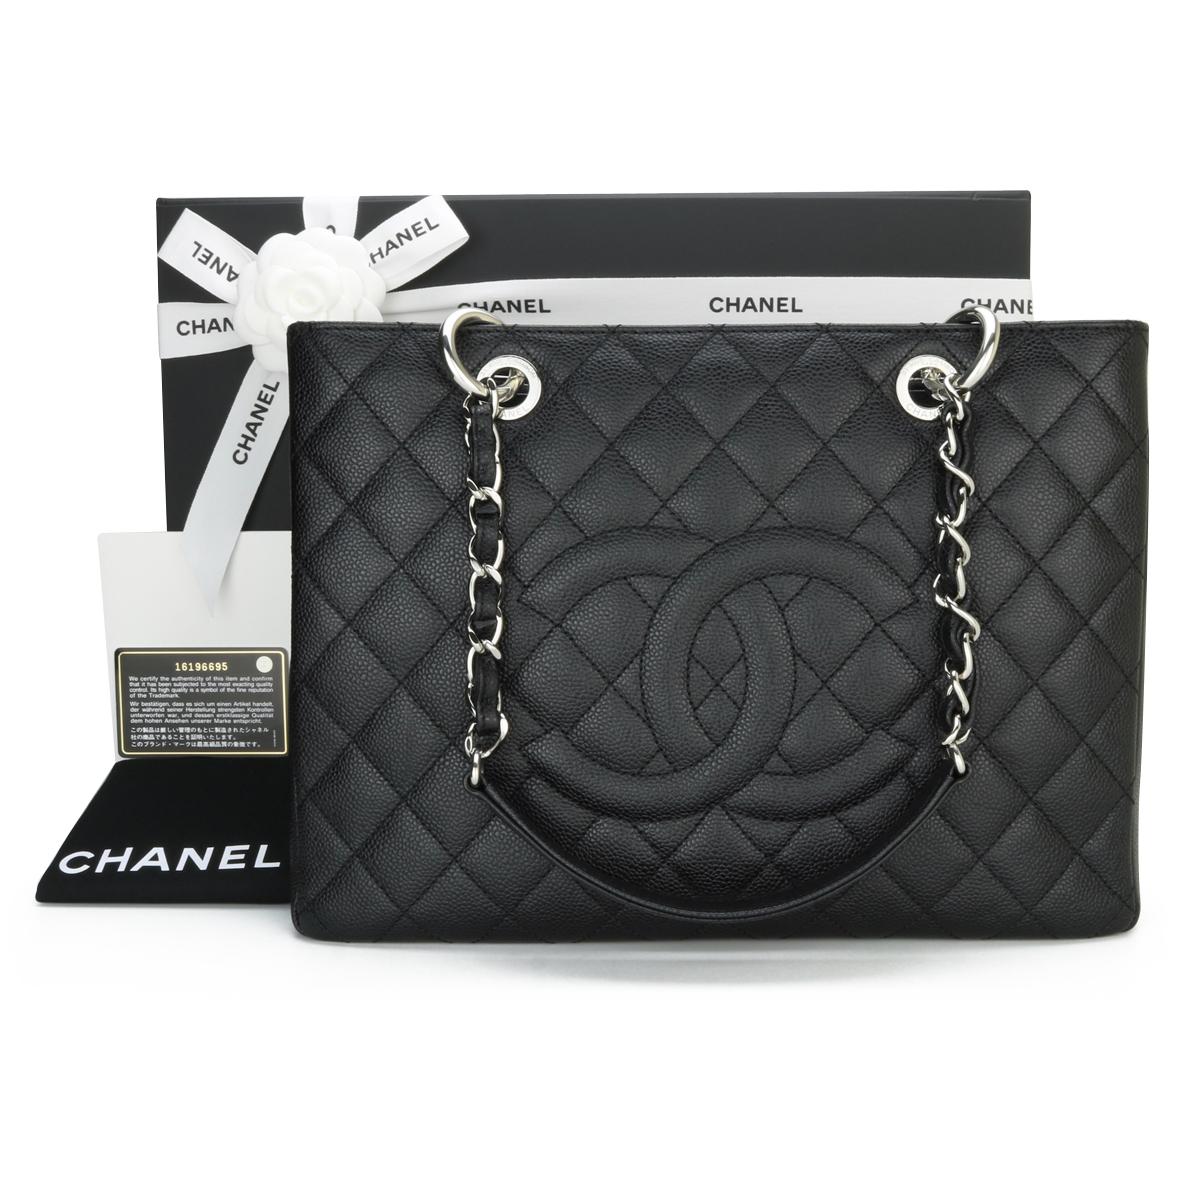 CHANEL Grand Shopping Tote (GST) Black Caviar with Silver Hardware 2012.

This bag is in pristine condition, the bag still holds its original shape, and the hardware is still very shiny.

As Chanel has discontinued the Grand Shopping Tote (GST), it